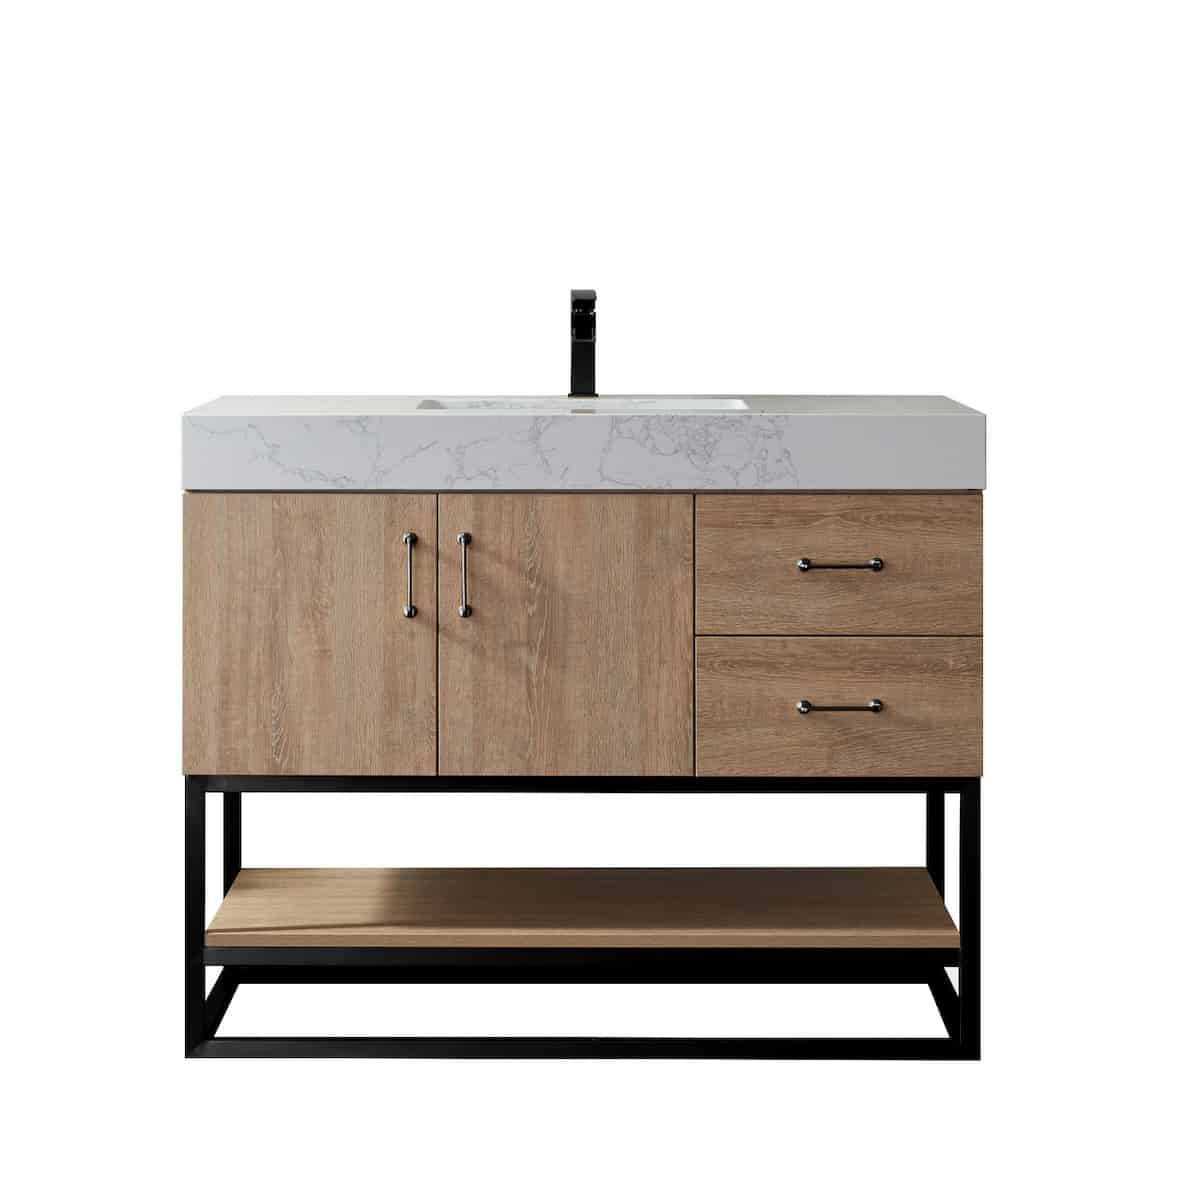 Vinnova Alistair 42 Inch Freestanding Single Vanity in North American Oak and Matte Black Frame with White Grain Stone Countertop Without Mirror 789042B-NO-GW-NM